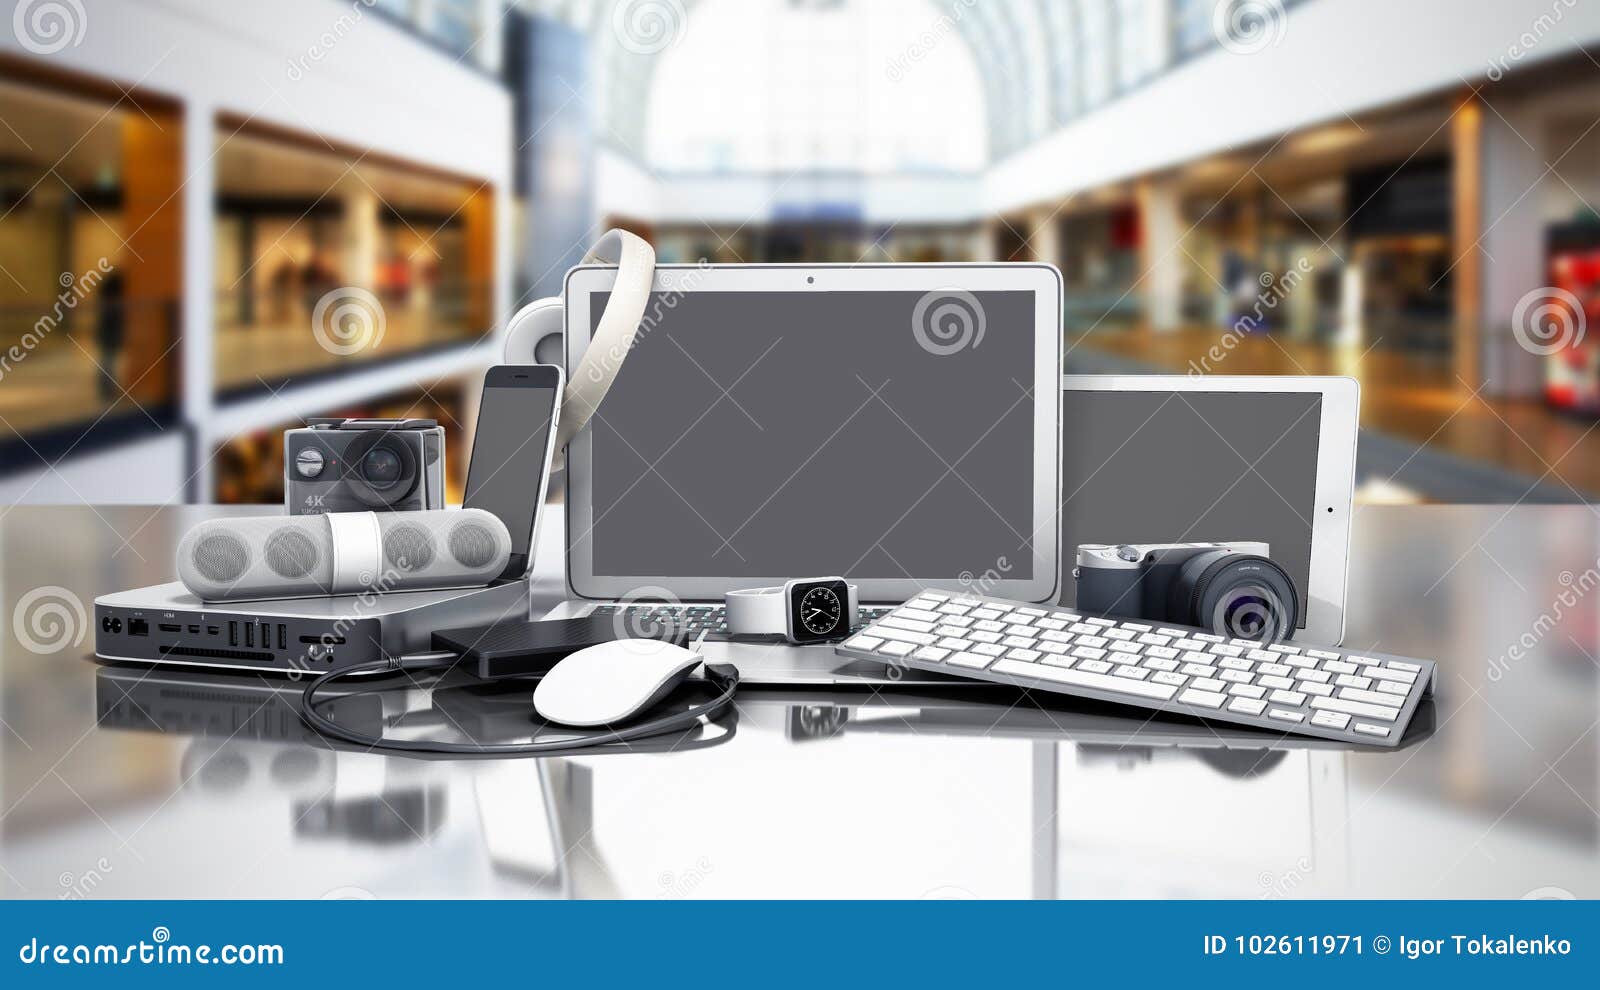 collection of consumer electronics 3d render on sale background